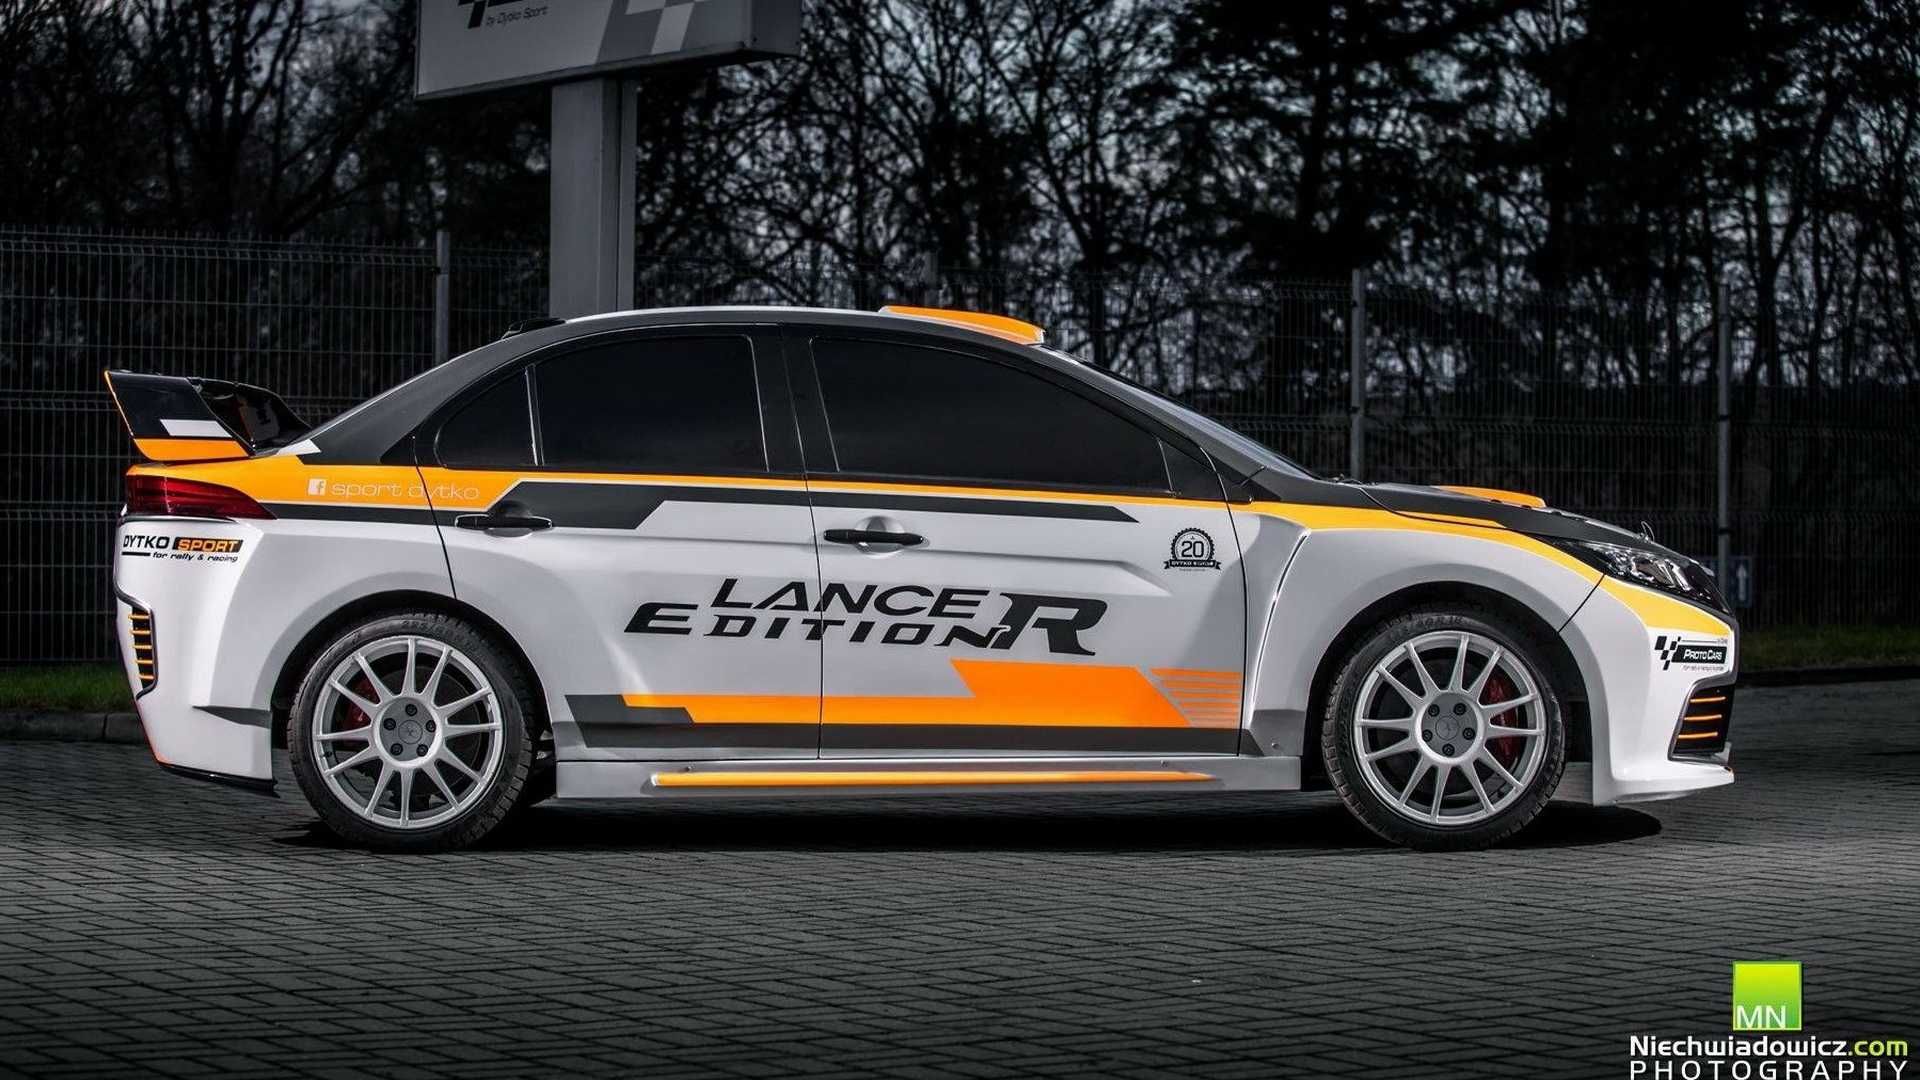 2019 Mitsubishi Lancer Edition R by Dytko and Proto Cars